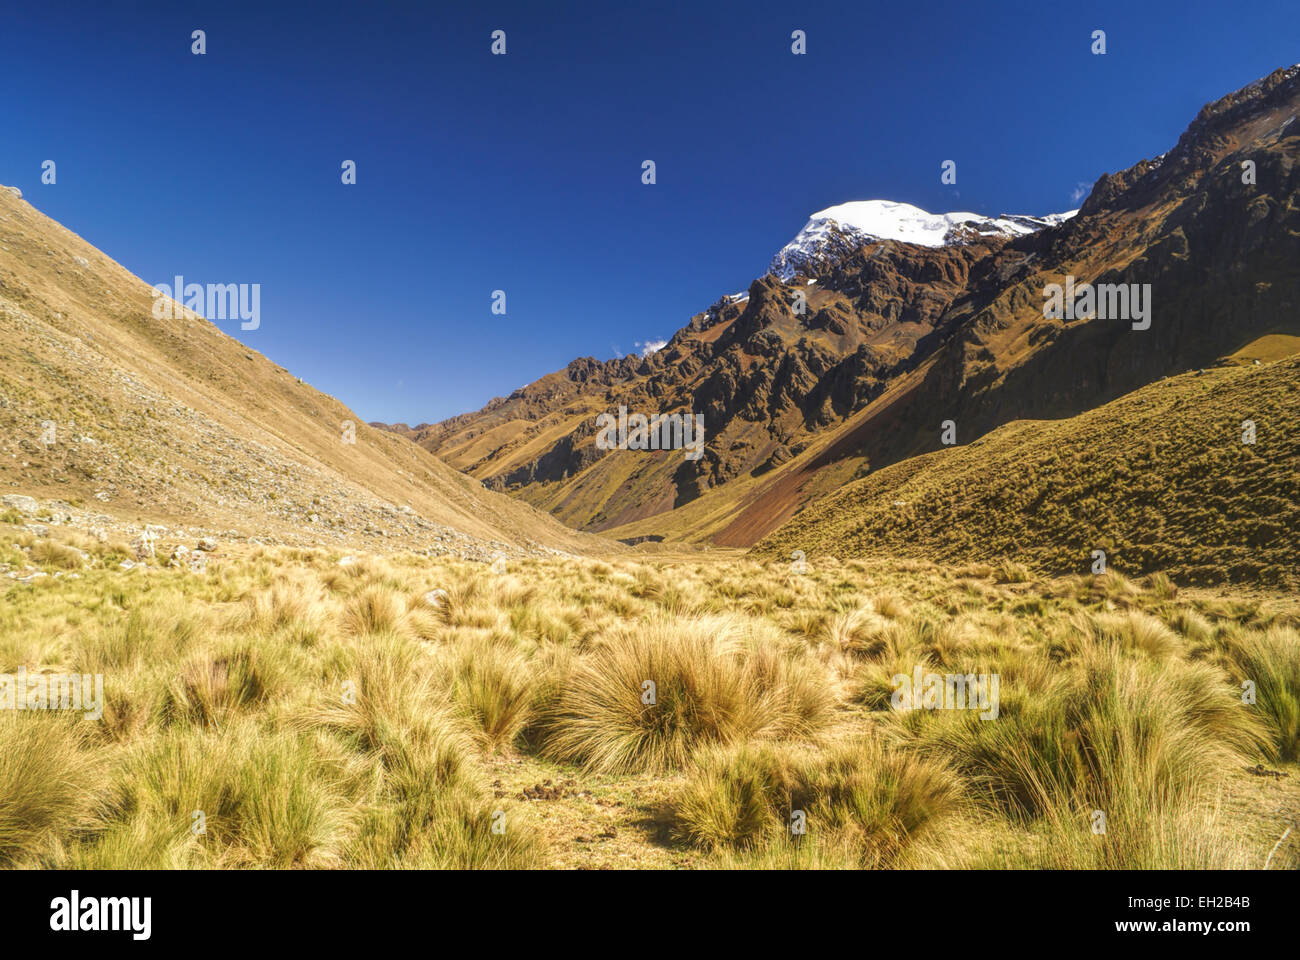 Picturesque valley between high mountain peaks in Peruvian Andes Stock Photo